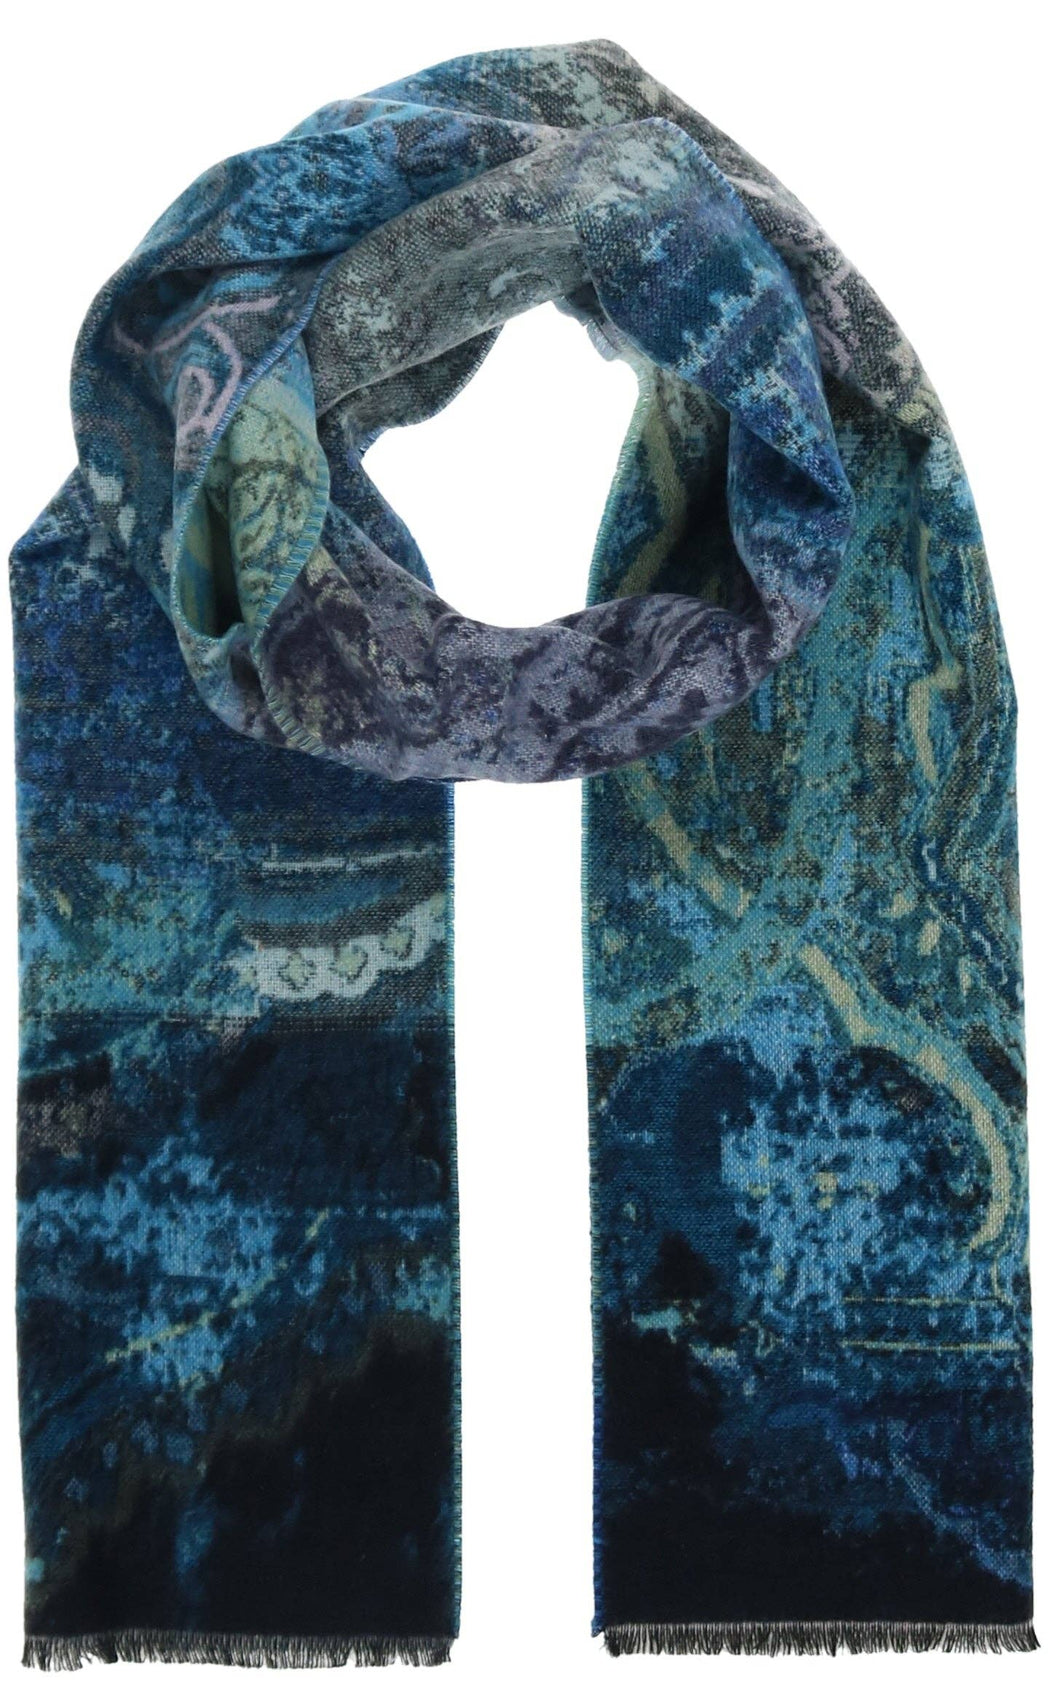 Distressed Paisley Recycled Cotton Cashmink Scarf: Navy